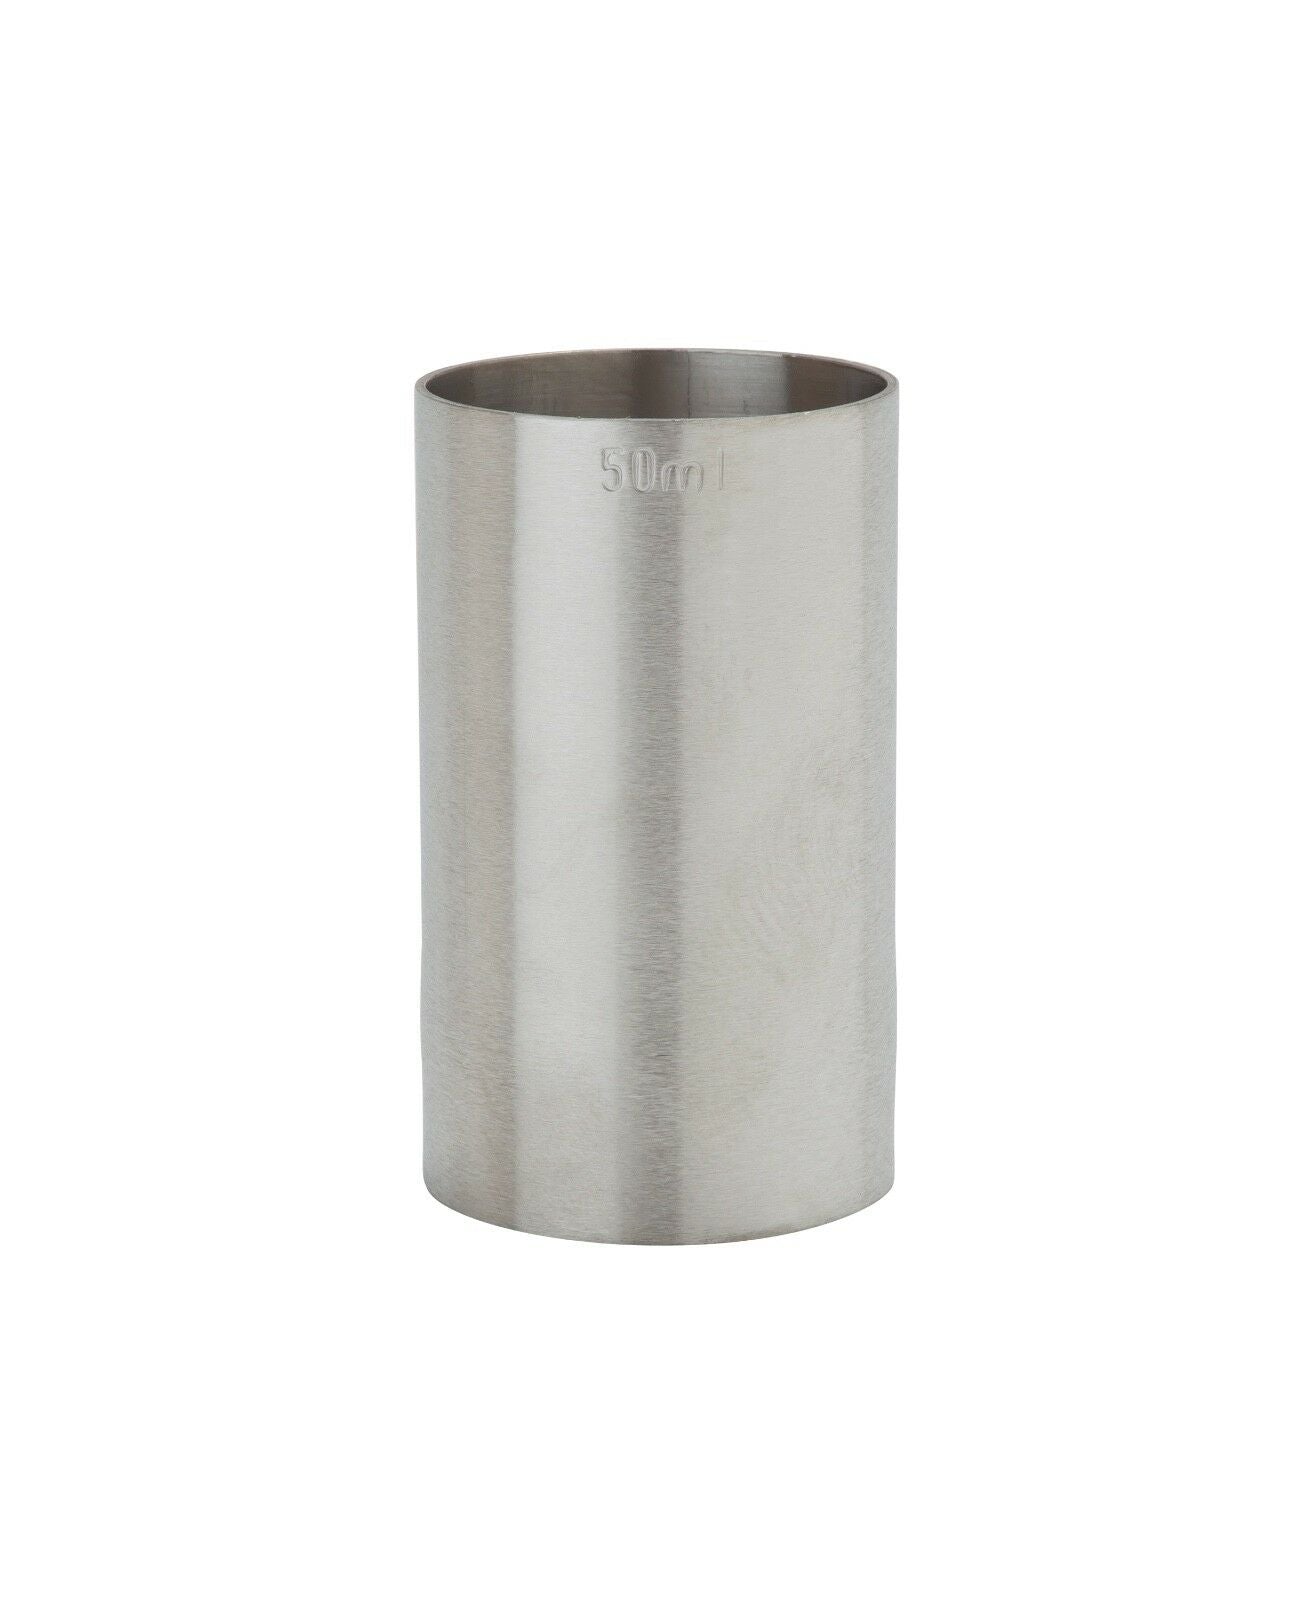 50ml Stainless Steel Thimble Measures CE Each